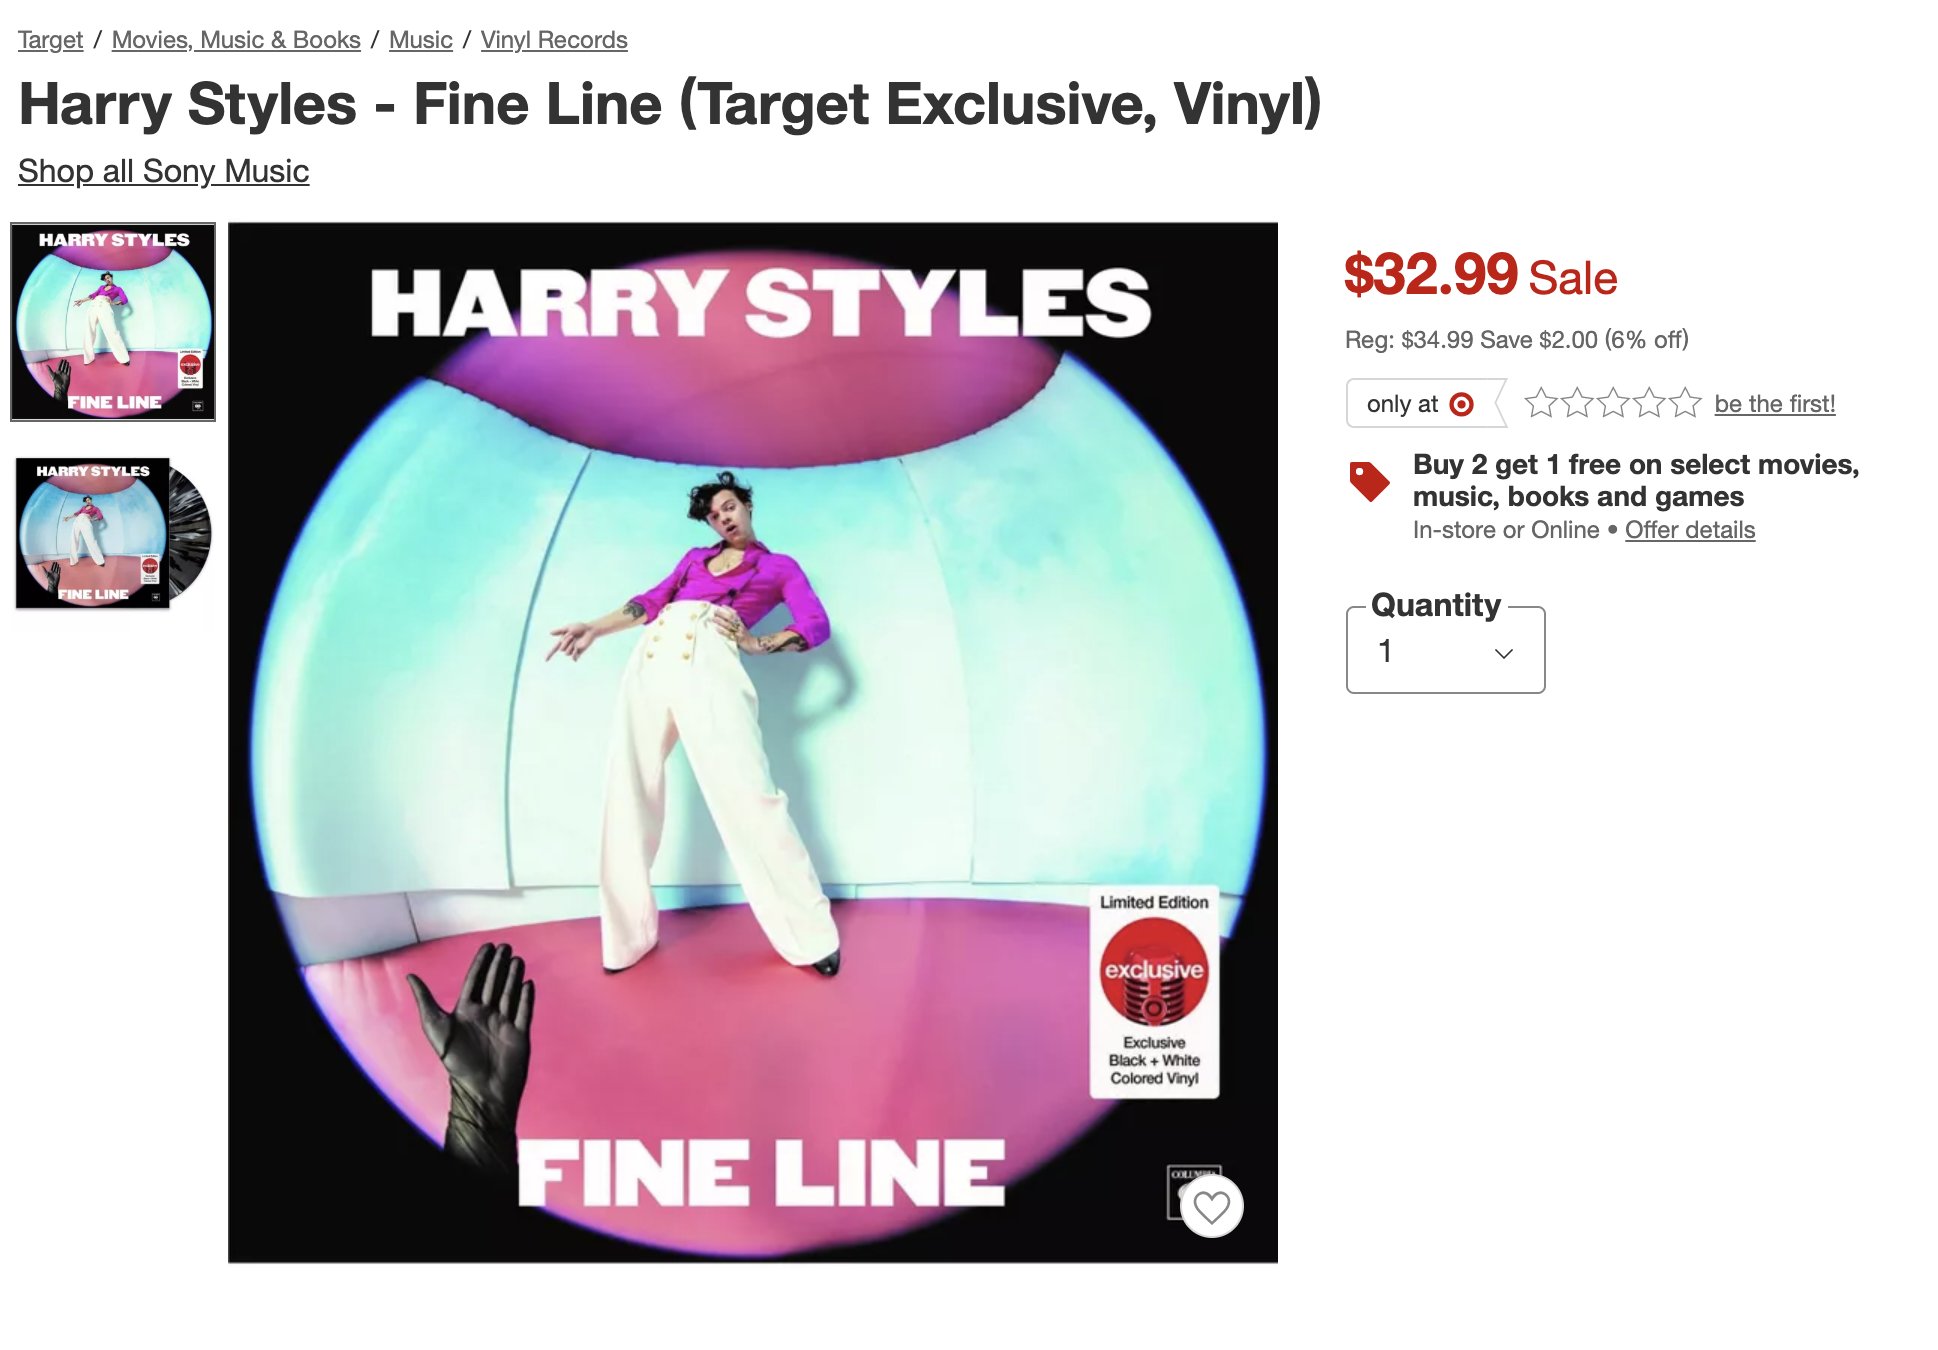 HSD 🛰️ on Twitter: ".@Harry_Styles 'Fine @Target Exclusive available for Pre-Order: https://t.co/9sKSx7FWam https://t.co/r5dHk4OLeH" / Twitter